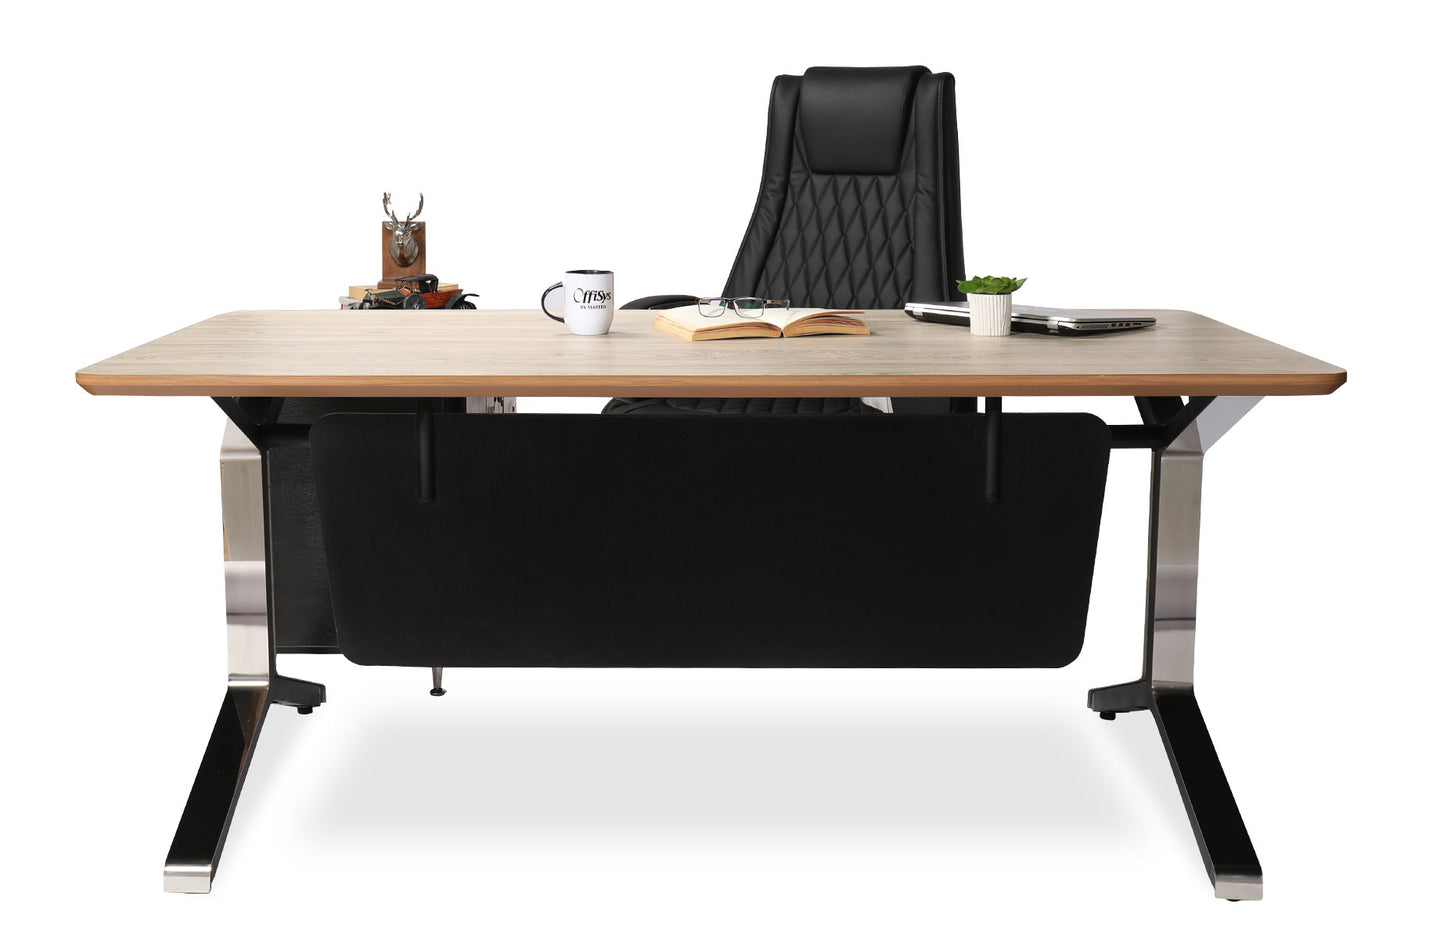 MO MANAGER TABLE 7236 WITHOUT DRAWER (MO-TREND-TJ-B17B-16C-12)